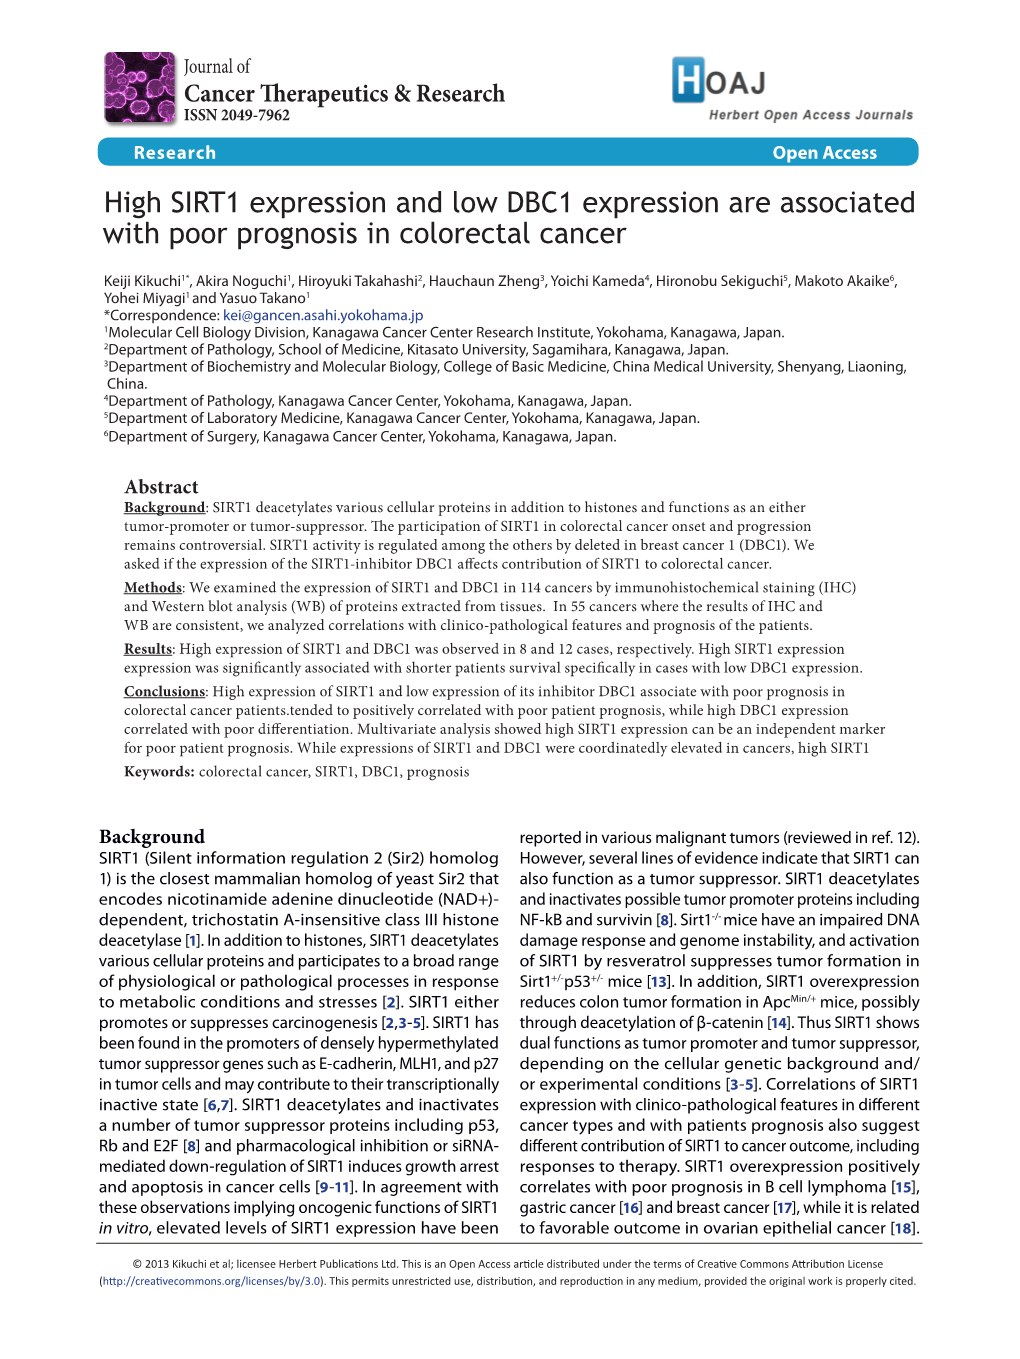 High SIRT1 Expression and Low DBC1 Expression Are Associated with Poor Prognosis in Colorectal Cancer